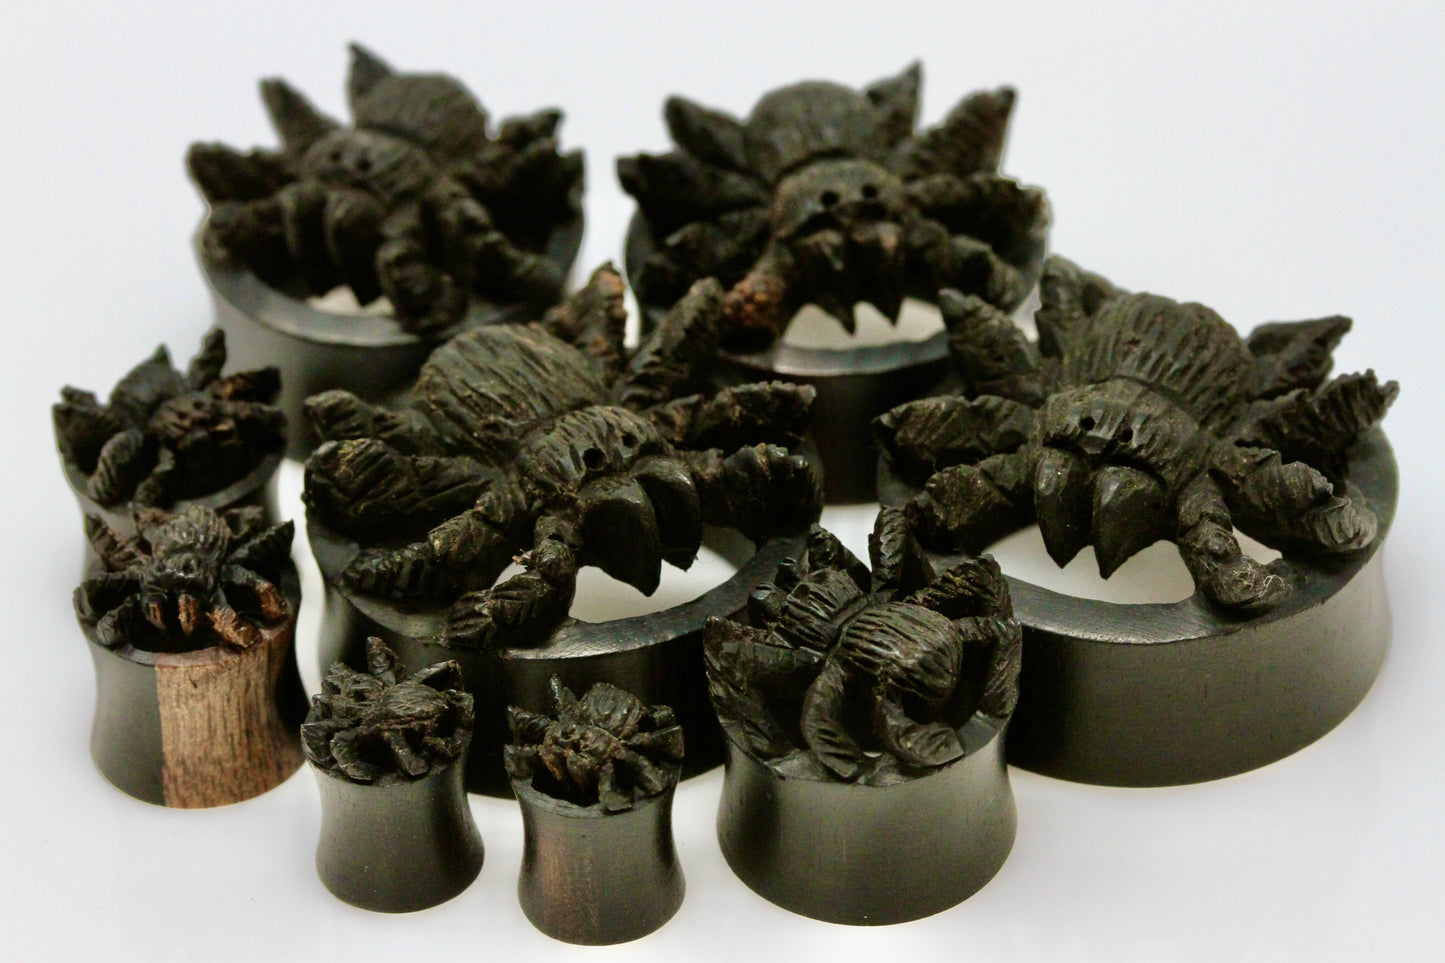 Areng spider tunnel plugs